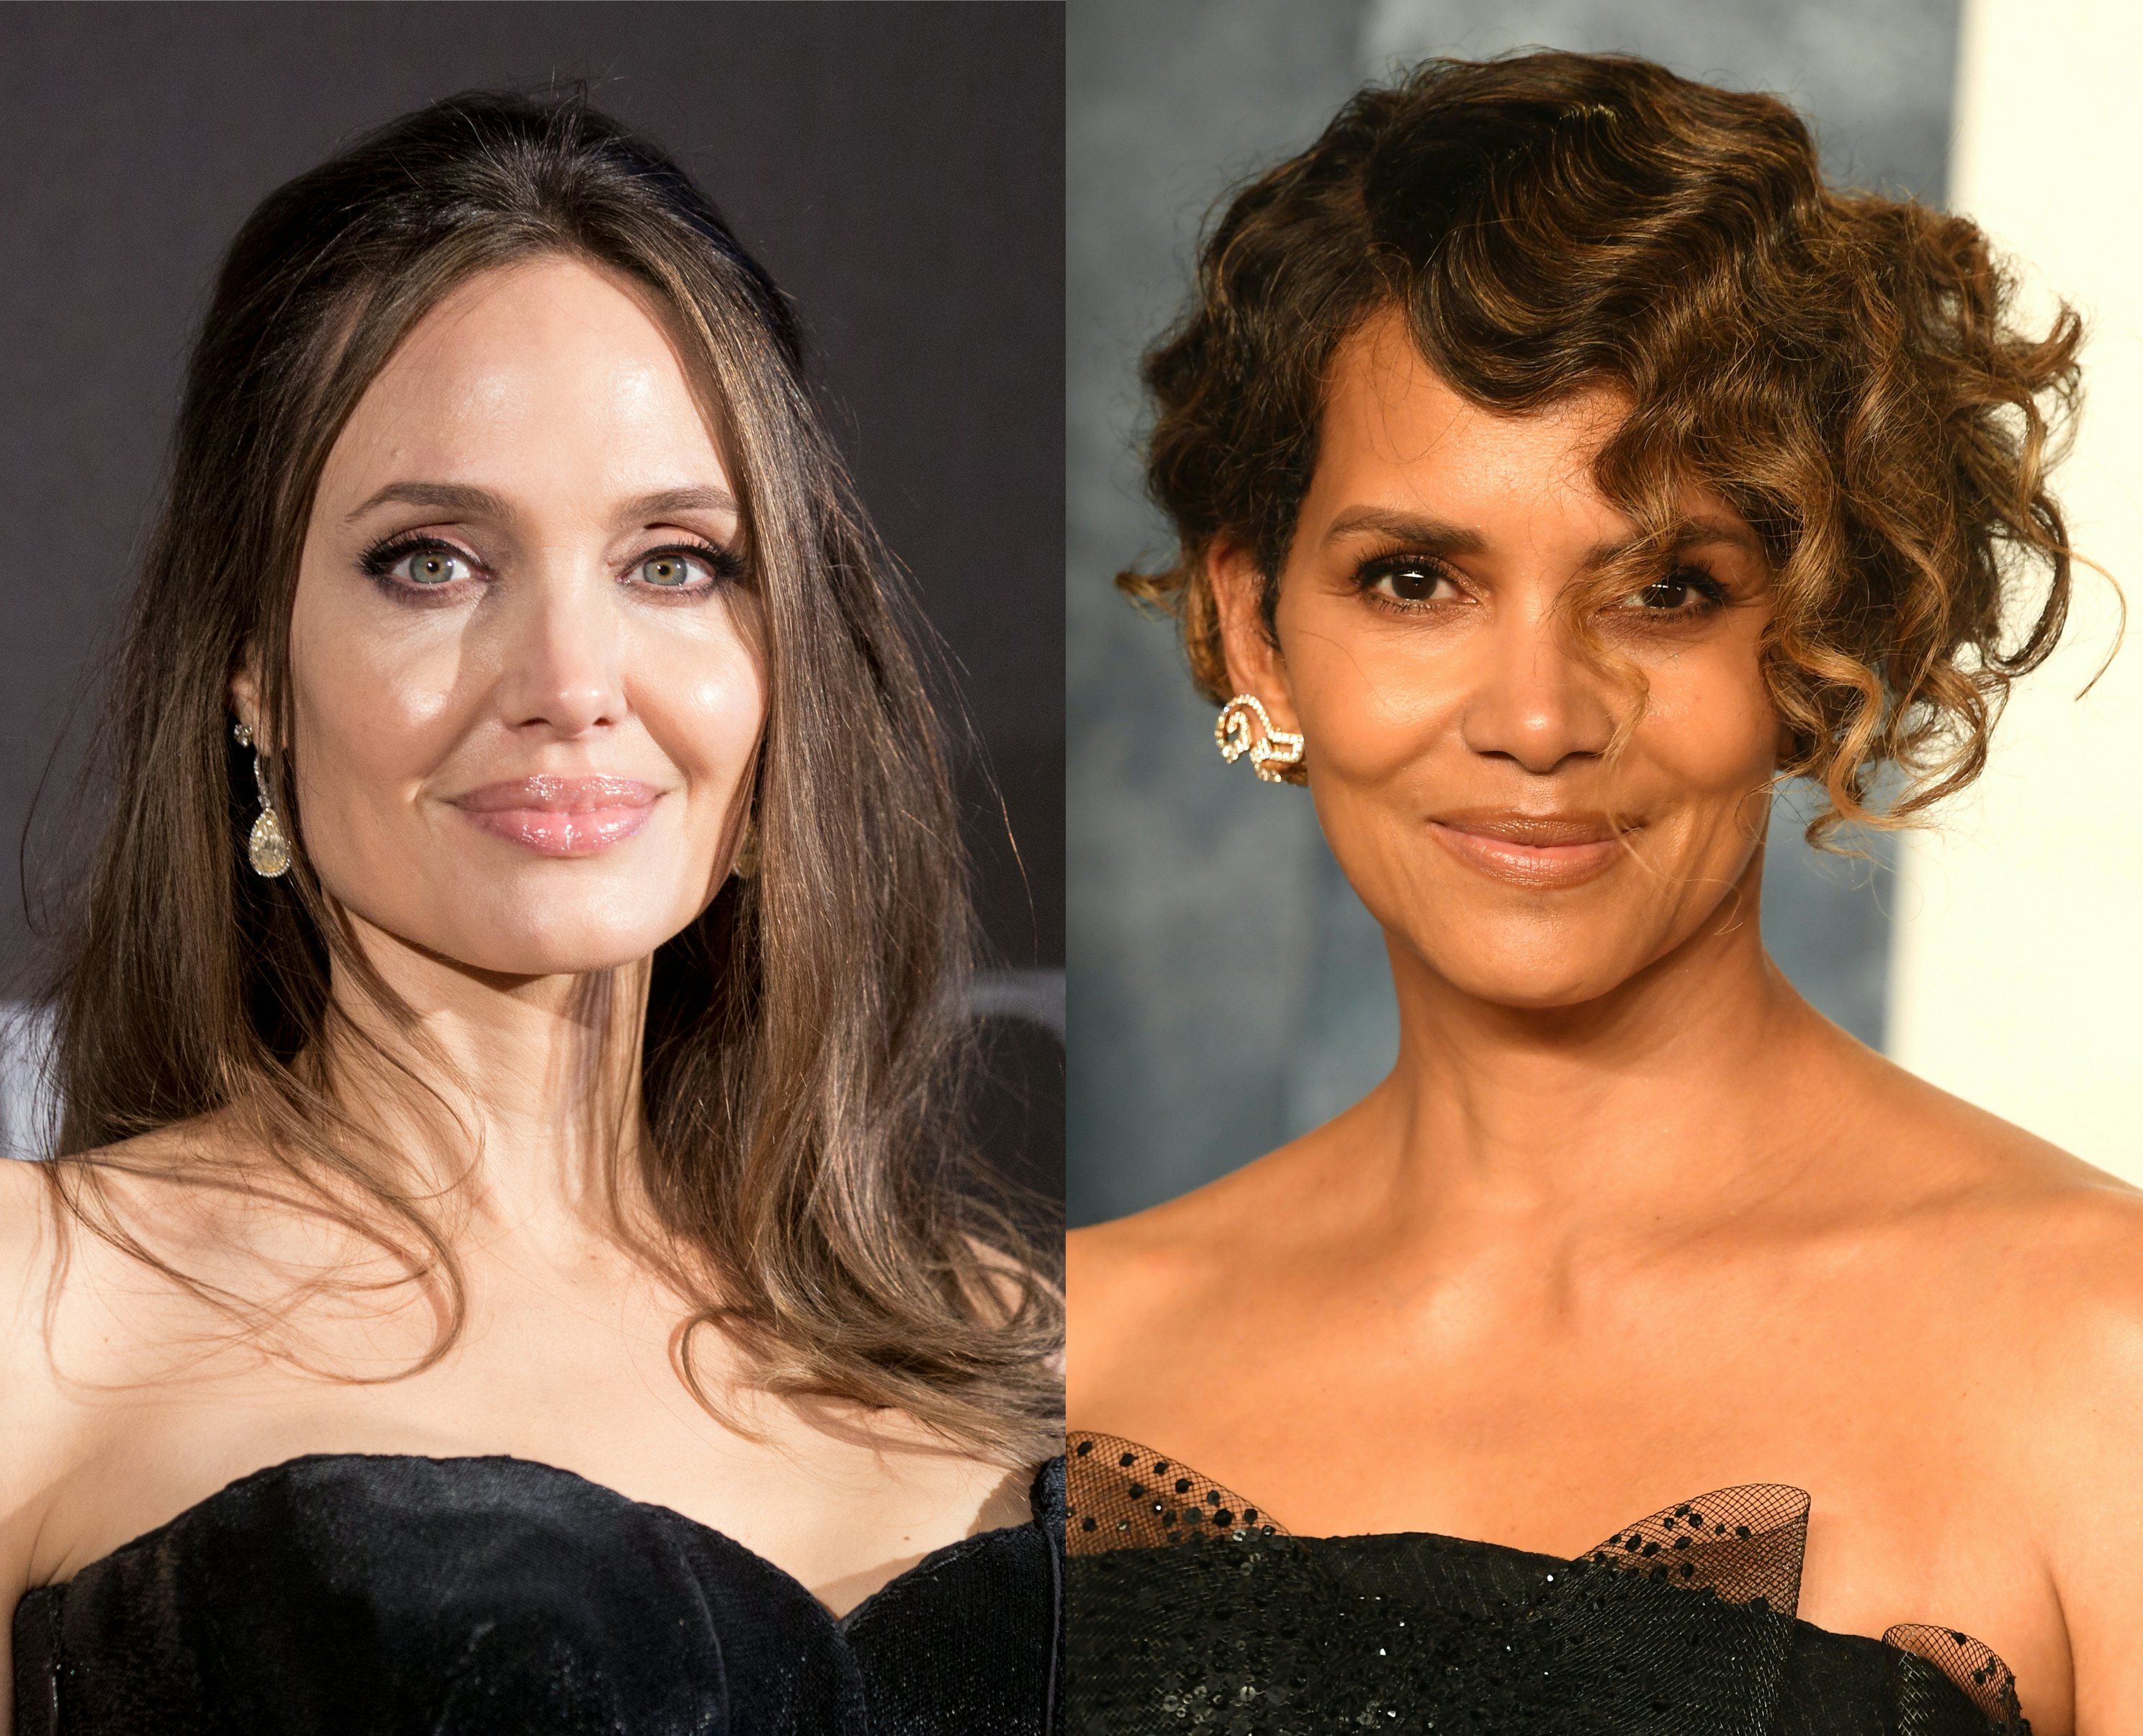 Halle Berry on Next Directing Project, Working With Angelina Jolie